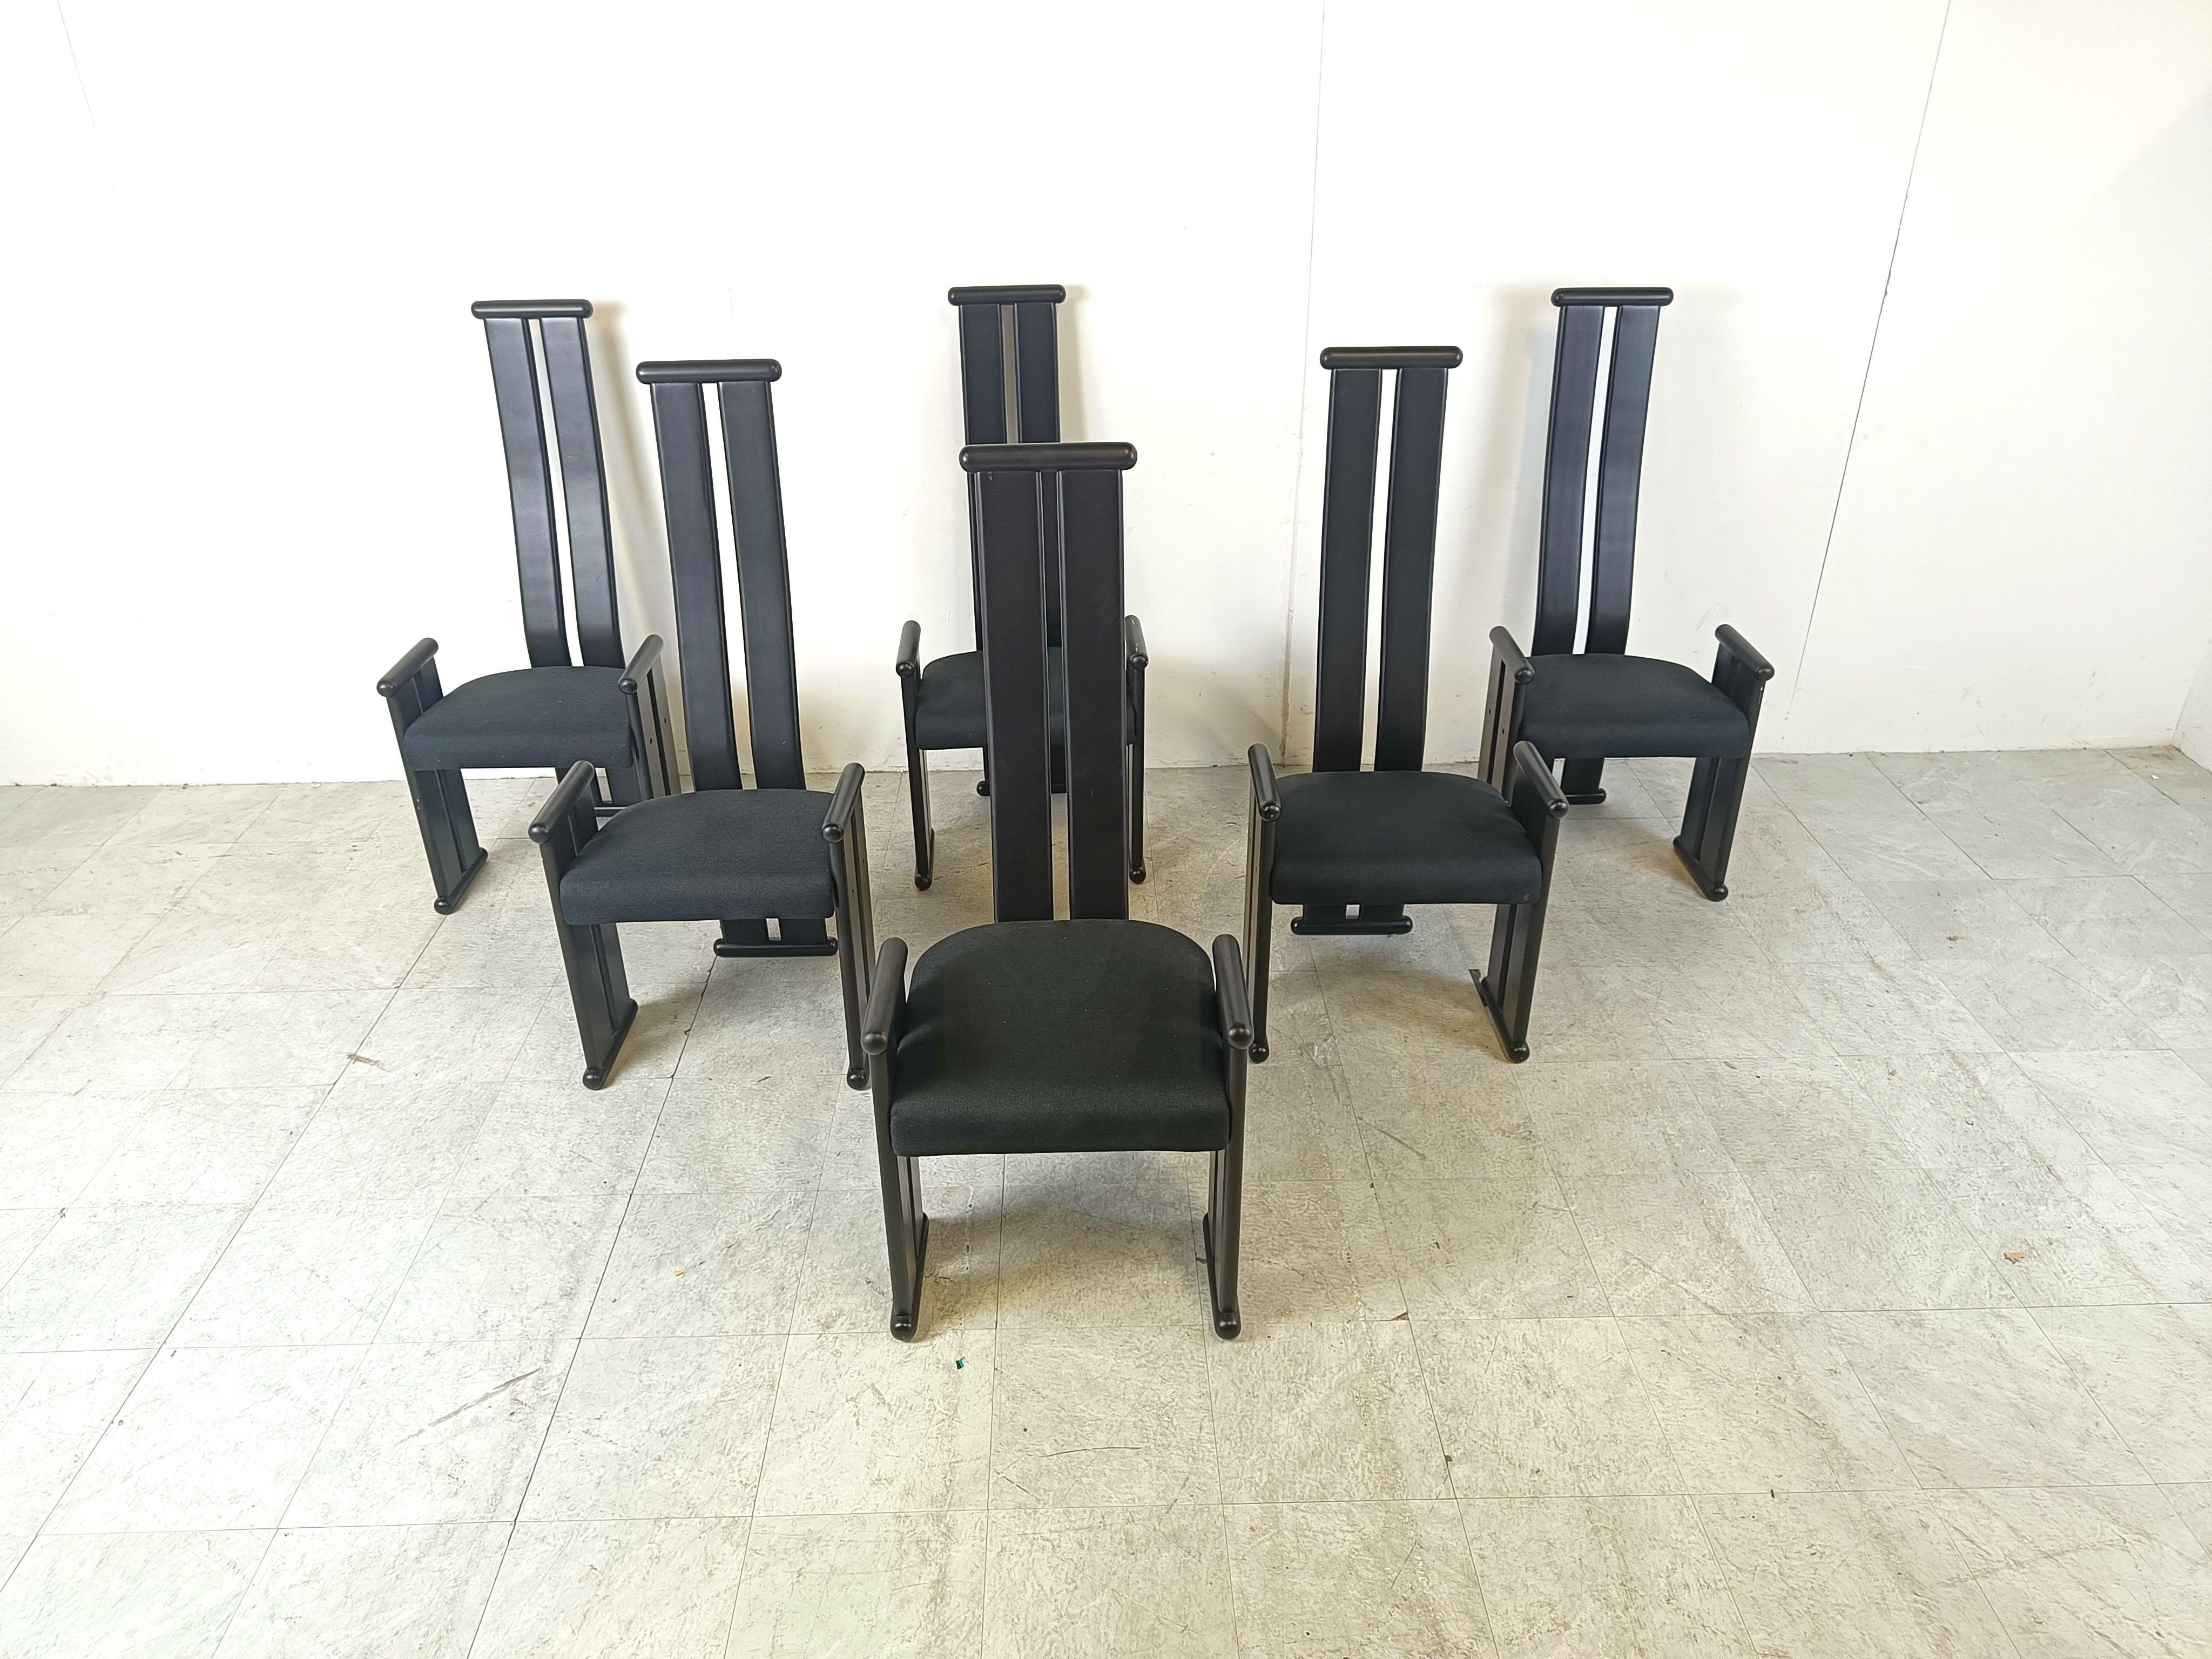 Striking vintage dining chairs with black ebonized wooden frames and a black fabric seat.

The post modern design with the long curved backrests is strongly inspired by the Golem chairs by Vico Magistretti.

Very cool chairs by an unknown designer.